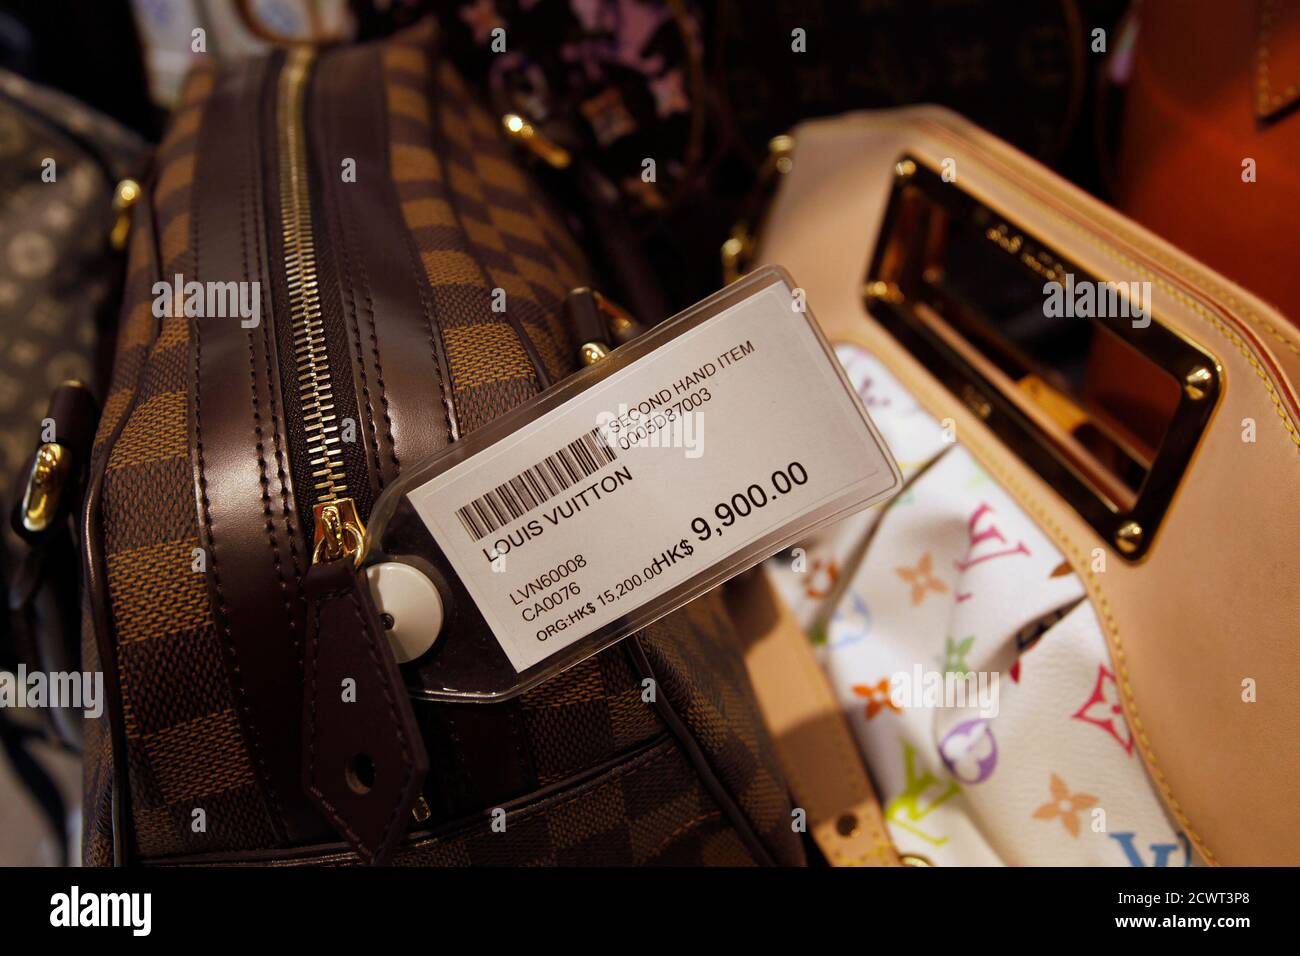 Designer handbags: What's in a price tag?